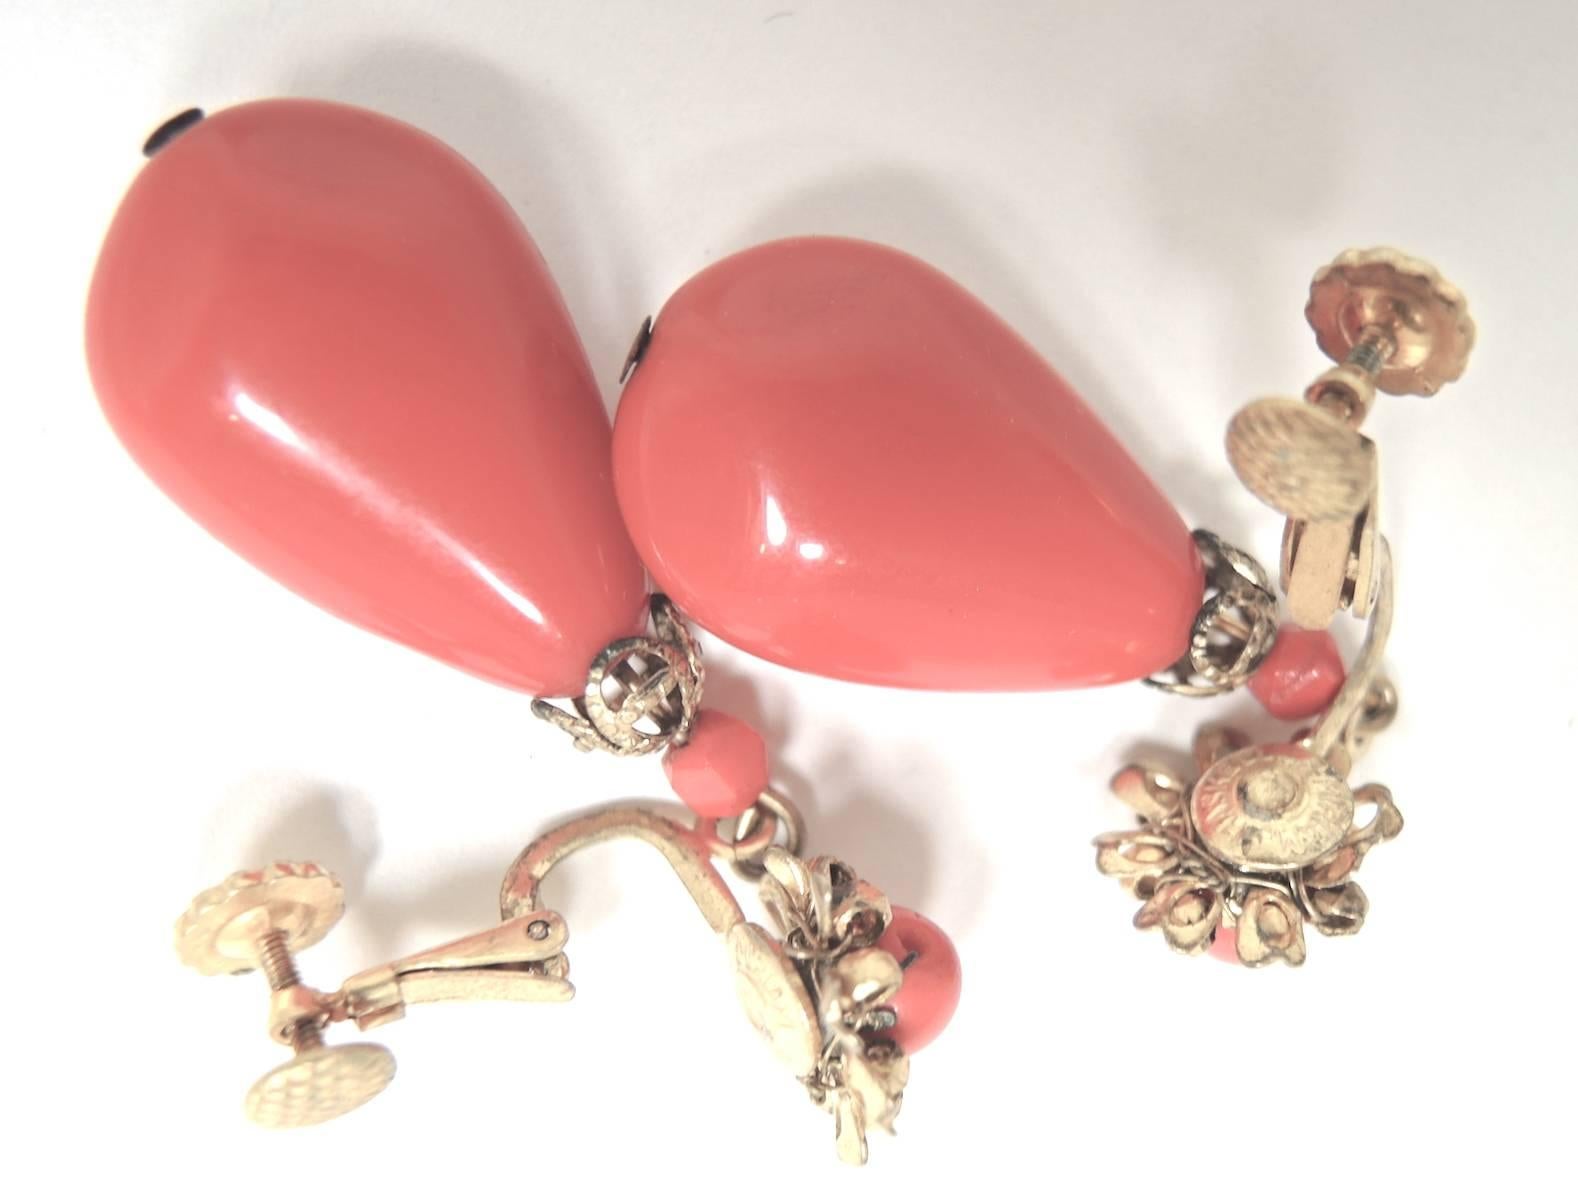 Vintage 1950s Signed Miriam Haskell Faux Coral Teardrop Clip Earrings 1